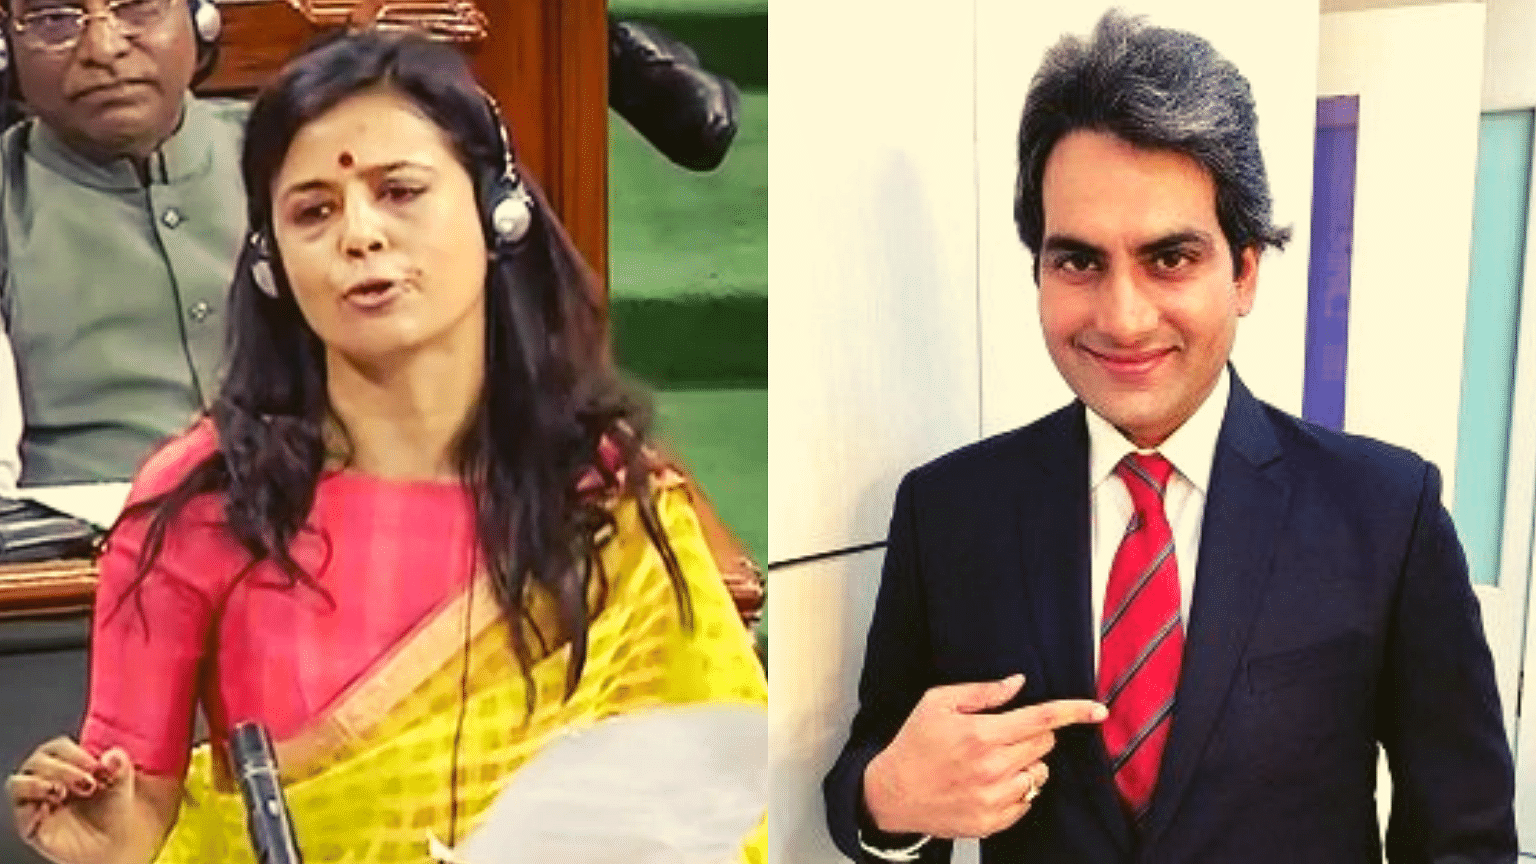 TMC MP Mahua Moitra has filed a criminal defamation case against Sudhir Chaudhary for alleging that her speech on the ‘Seven Signs of Fascism’ was plagiarised.